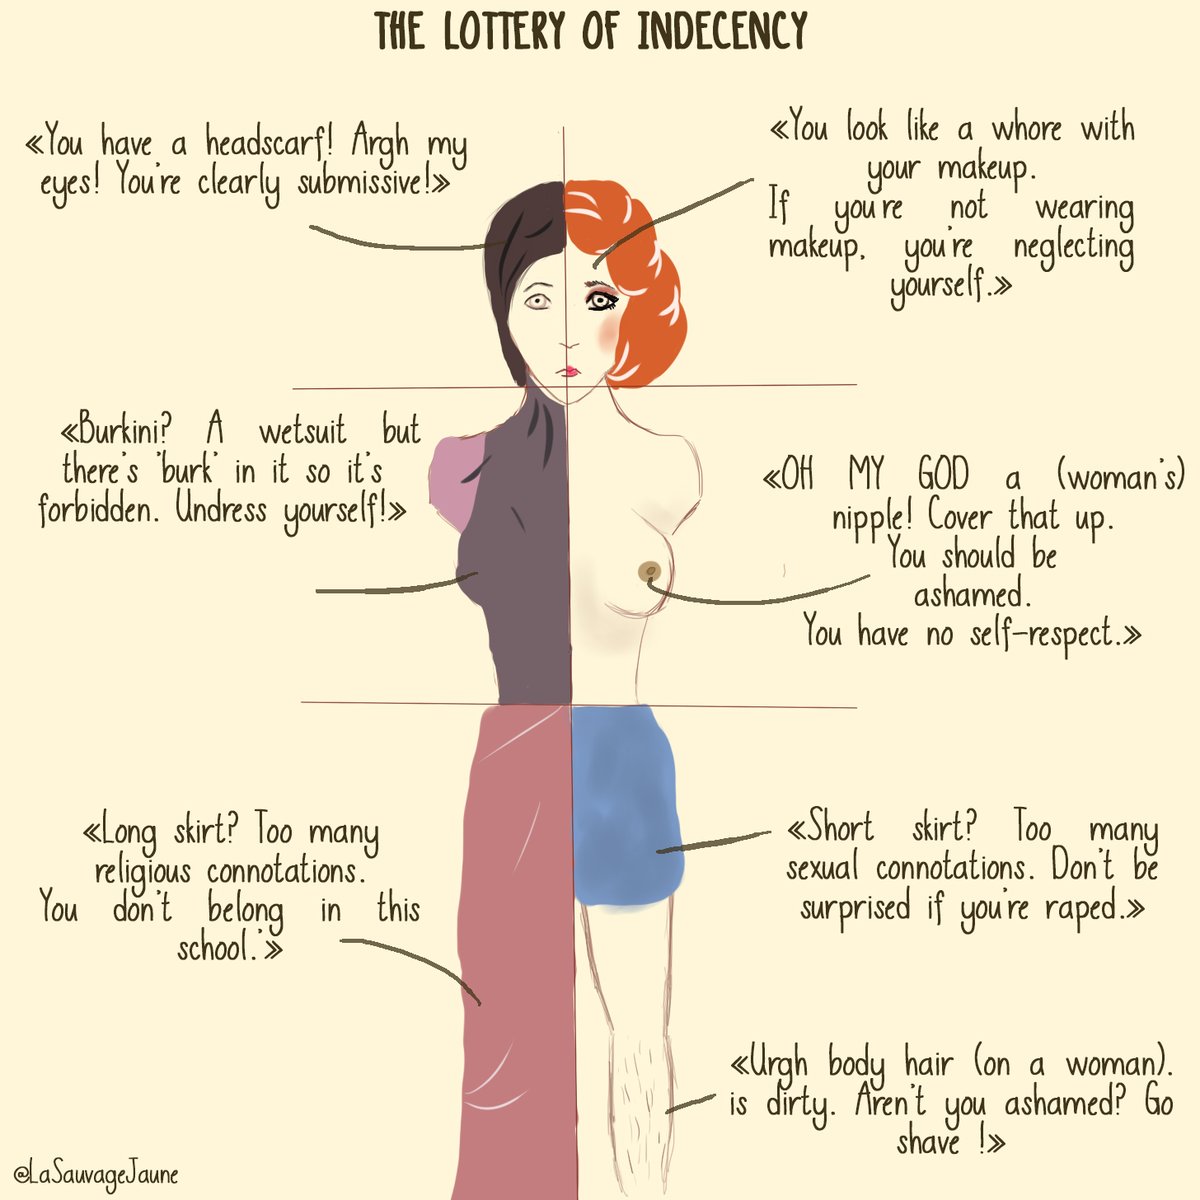 The Lottery of Indecency - a picture showing that women are constantly told what to wear